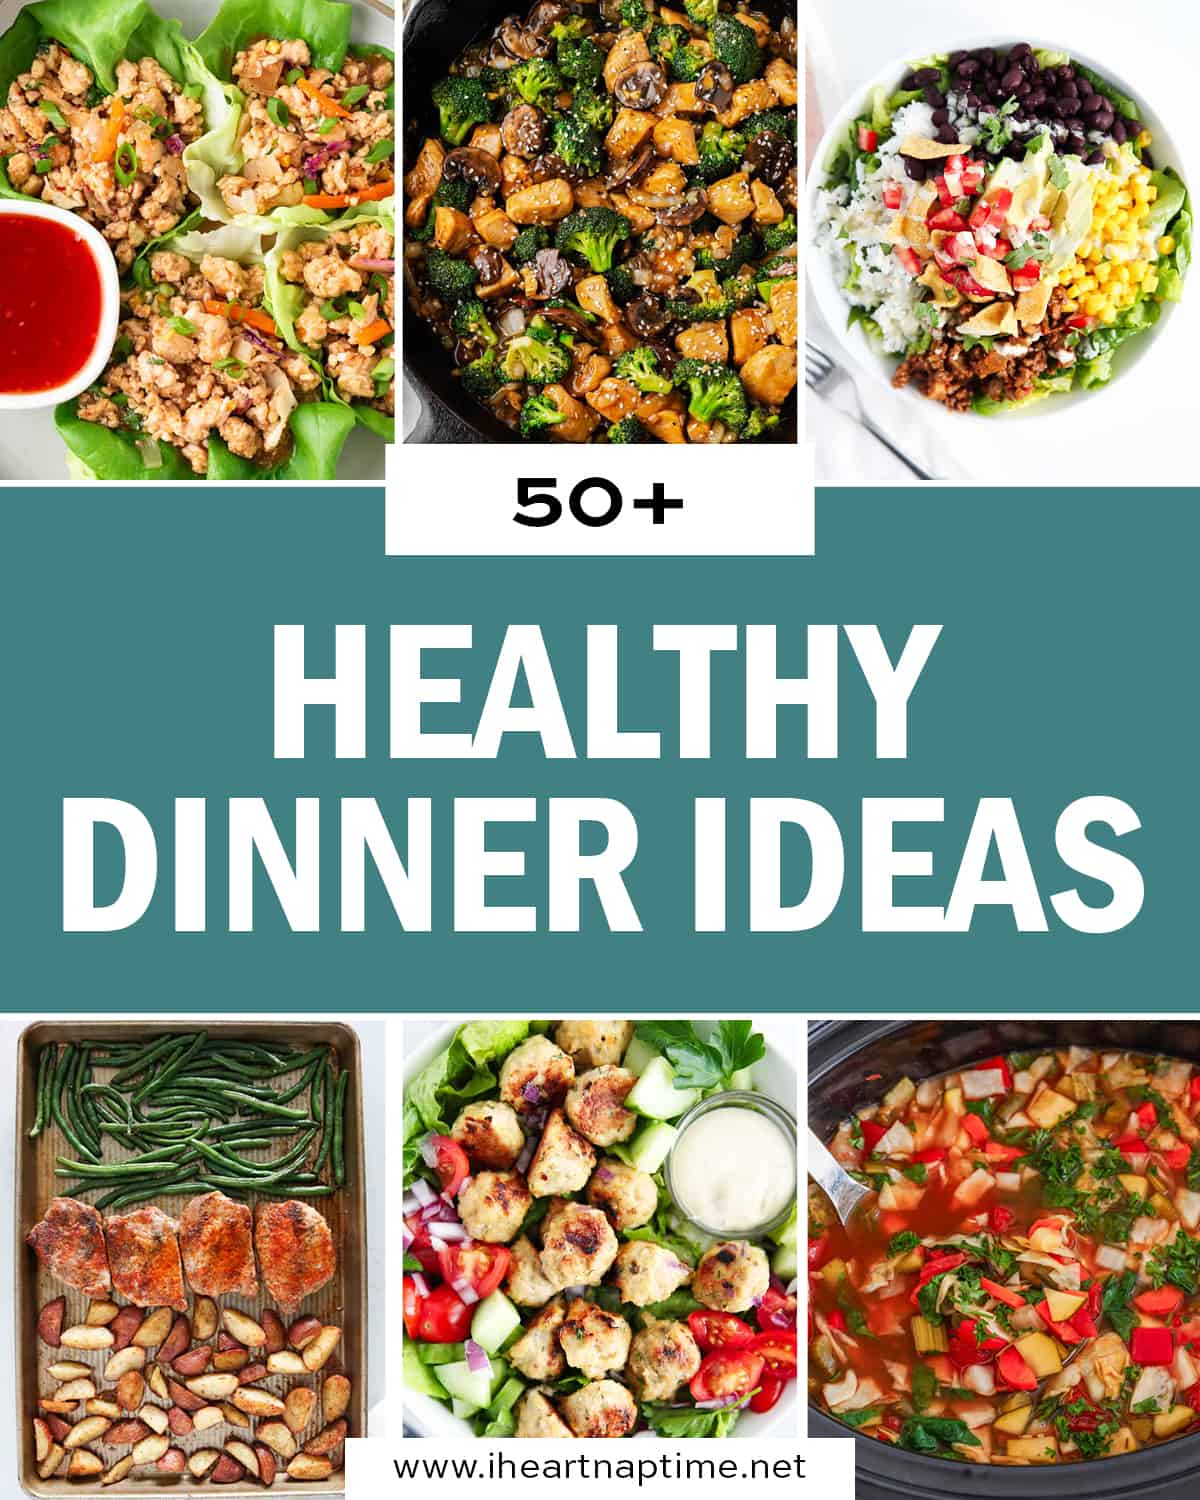 A photo collage of healthy dinner ideas.